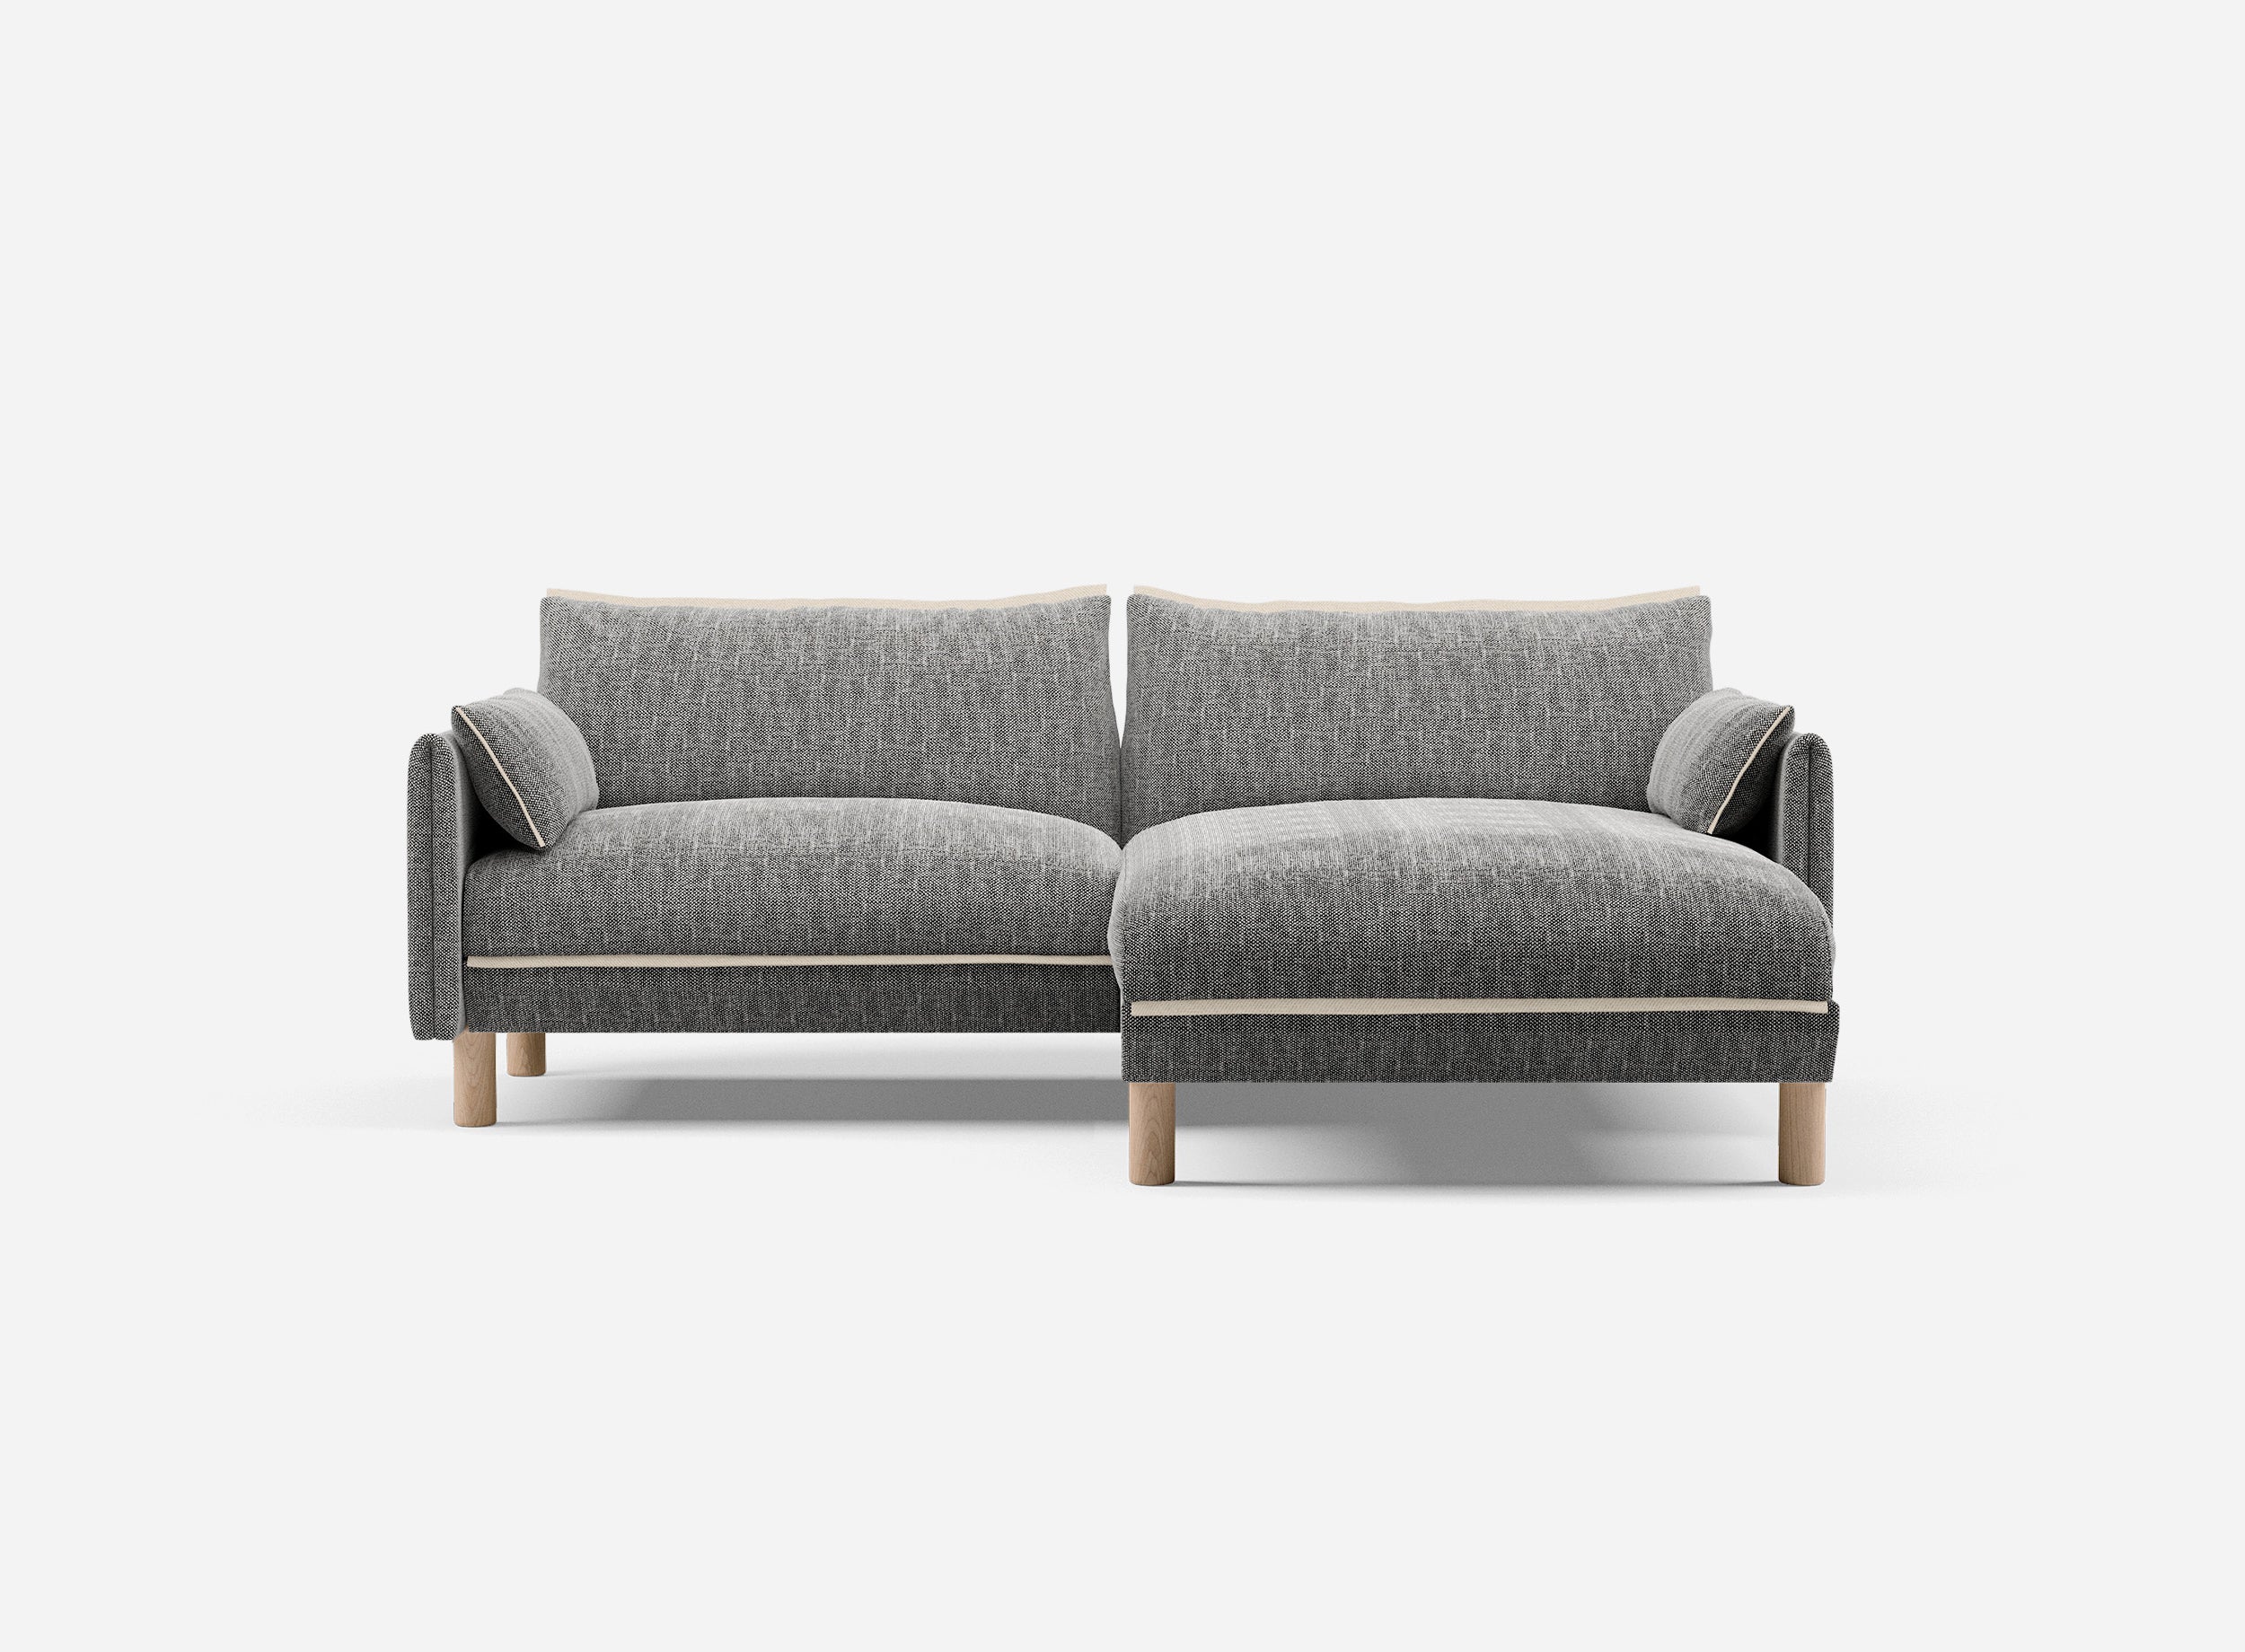 3 Seater Chaise Corner Right Hand Sofa | Textured Weave Salt & Pepper - Cozmo @ Salt & Pepper Textured Weave Jacket | Natural Trim